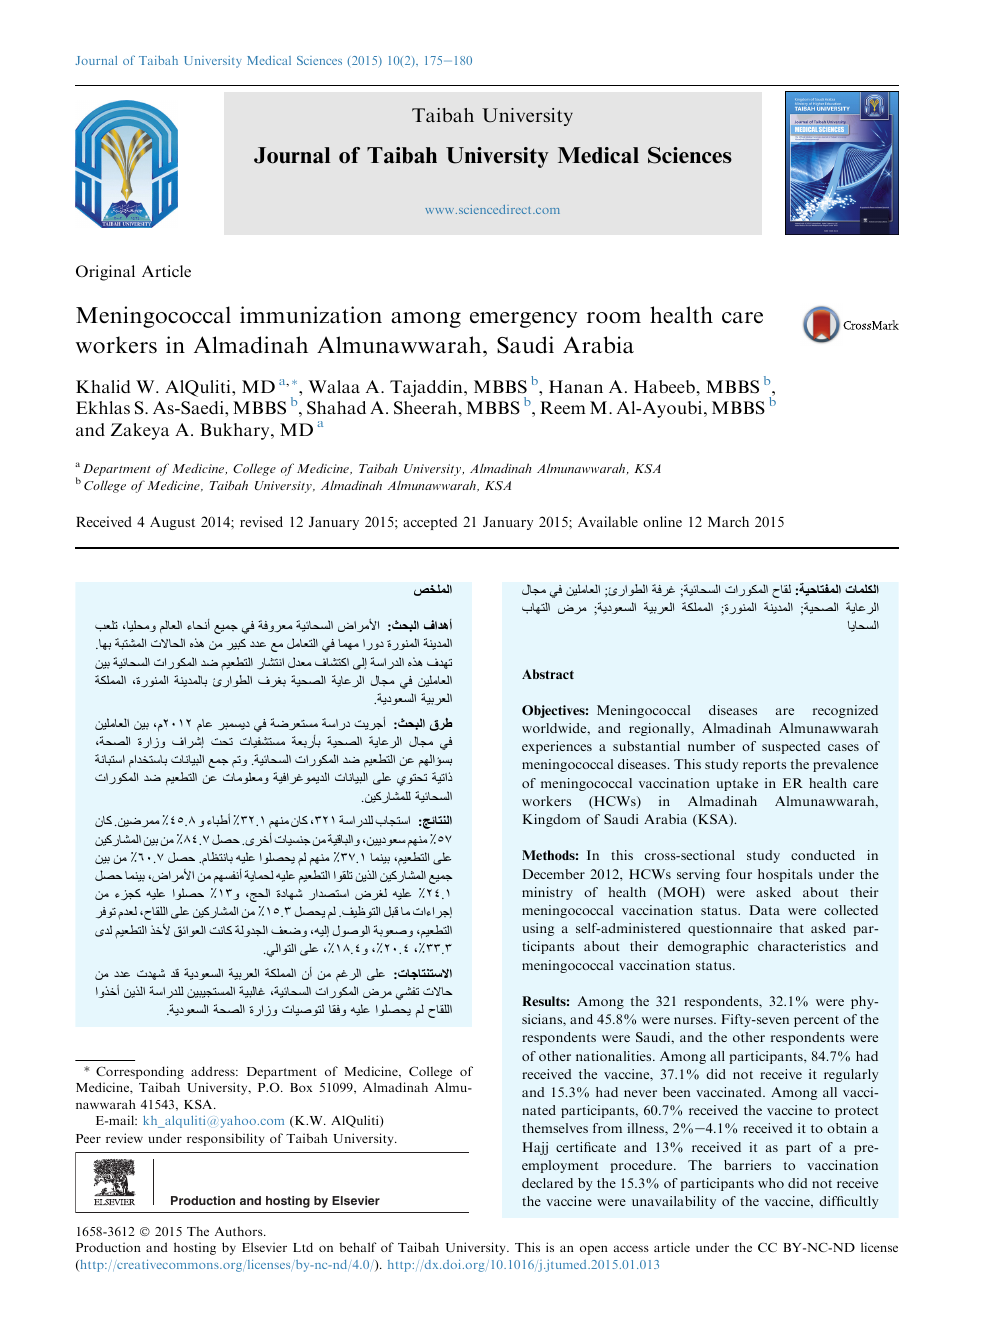 Meningococcal Immunization Among Emergency Room Health Care Workers In Almadinah Almunawwarah Saudi Arabia Topic Of Research Paper In Clinical Medicine Download Scholarly Article Pdf And Read For Free On Cyberleninka Open